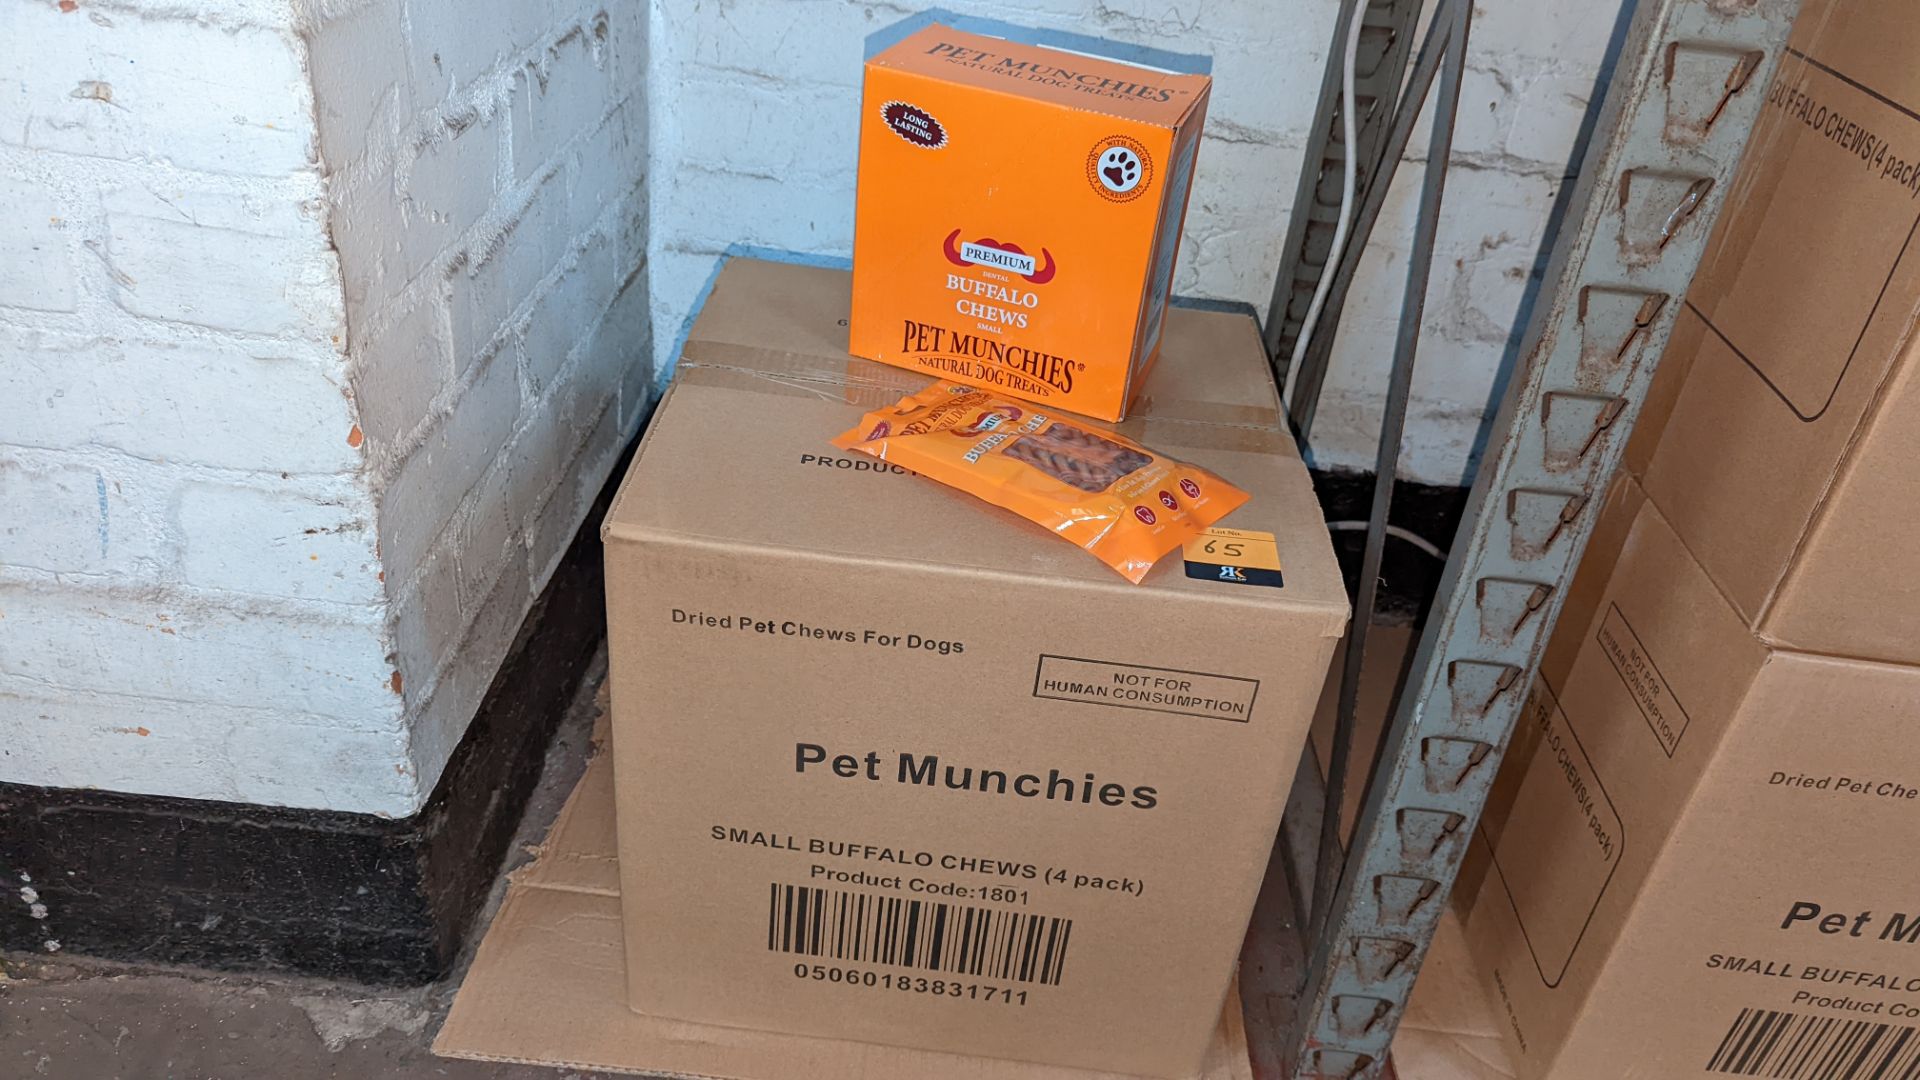 Pet Munchies dried pet chews for dogs. This lot consists of a total of 24 orange retail display box - Image 2 of 4